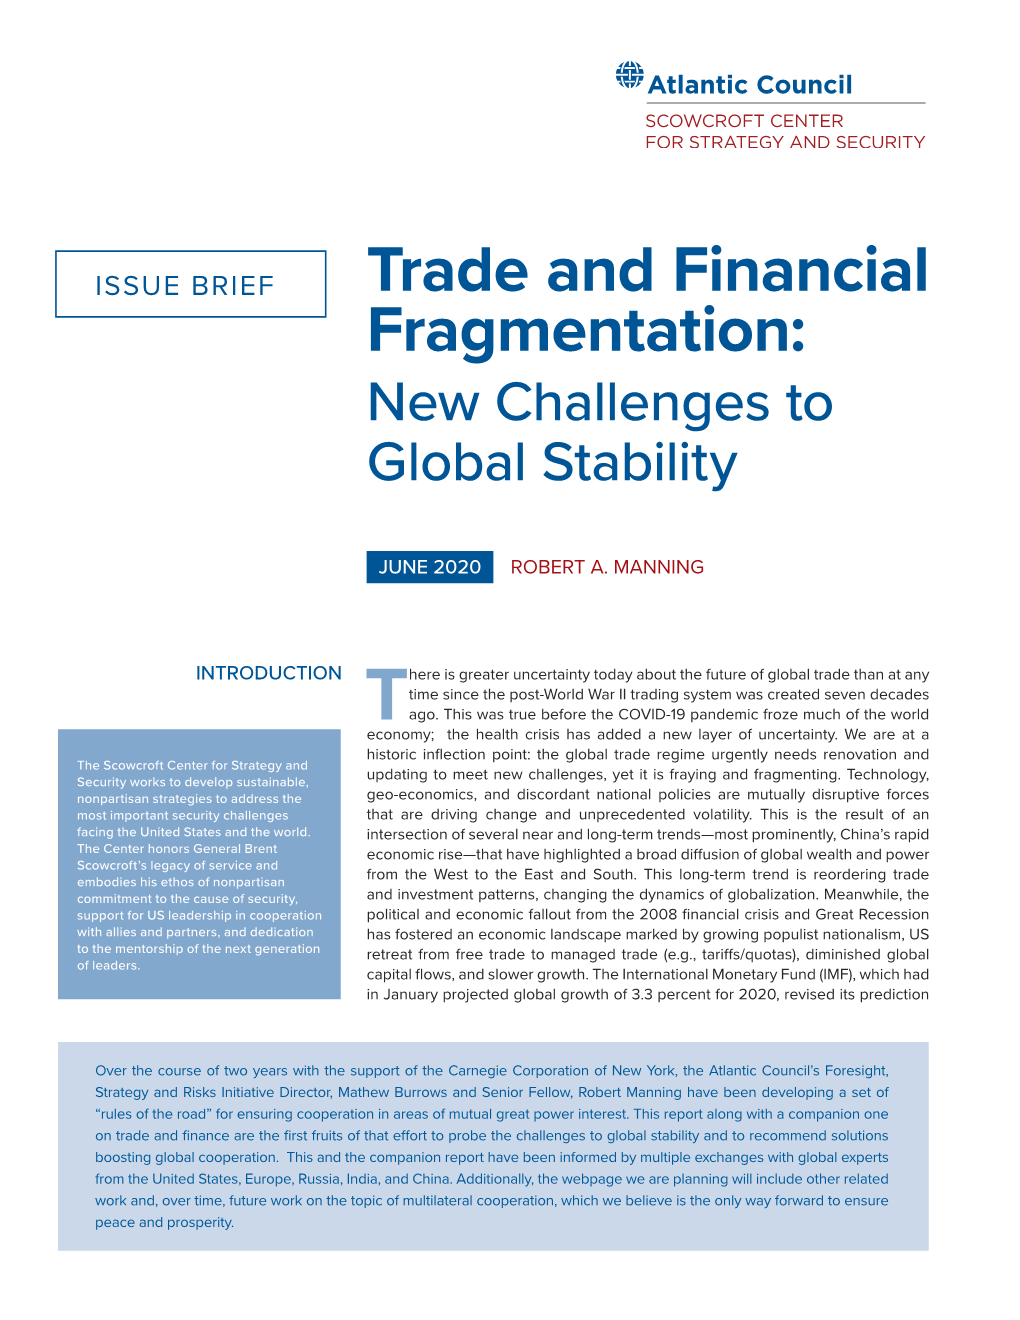 Trade and Financial Fragmentation: New Challenges to Global Stability